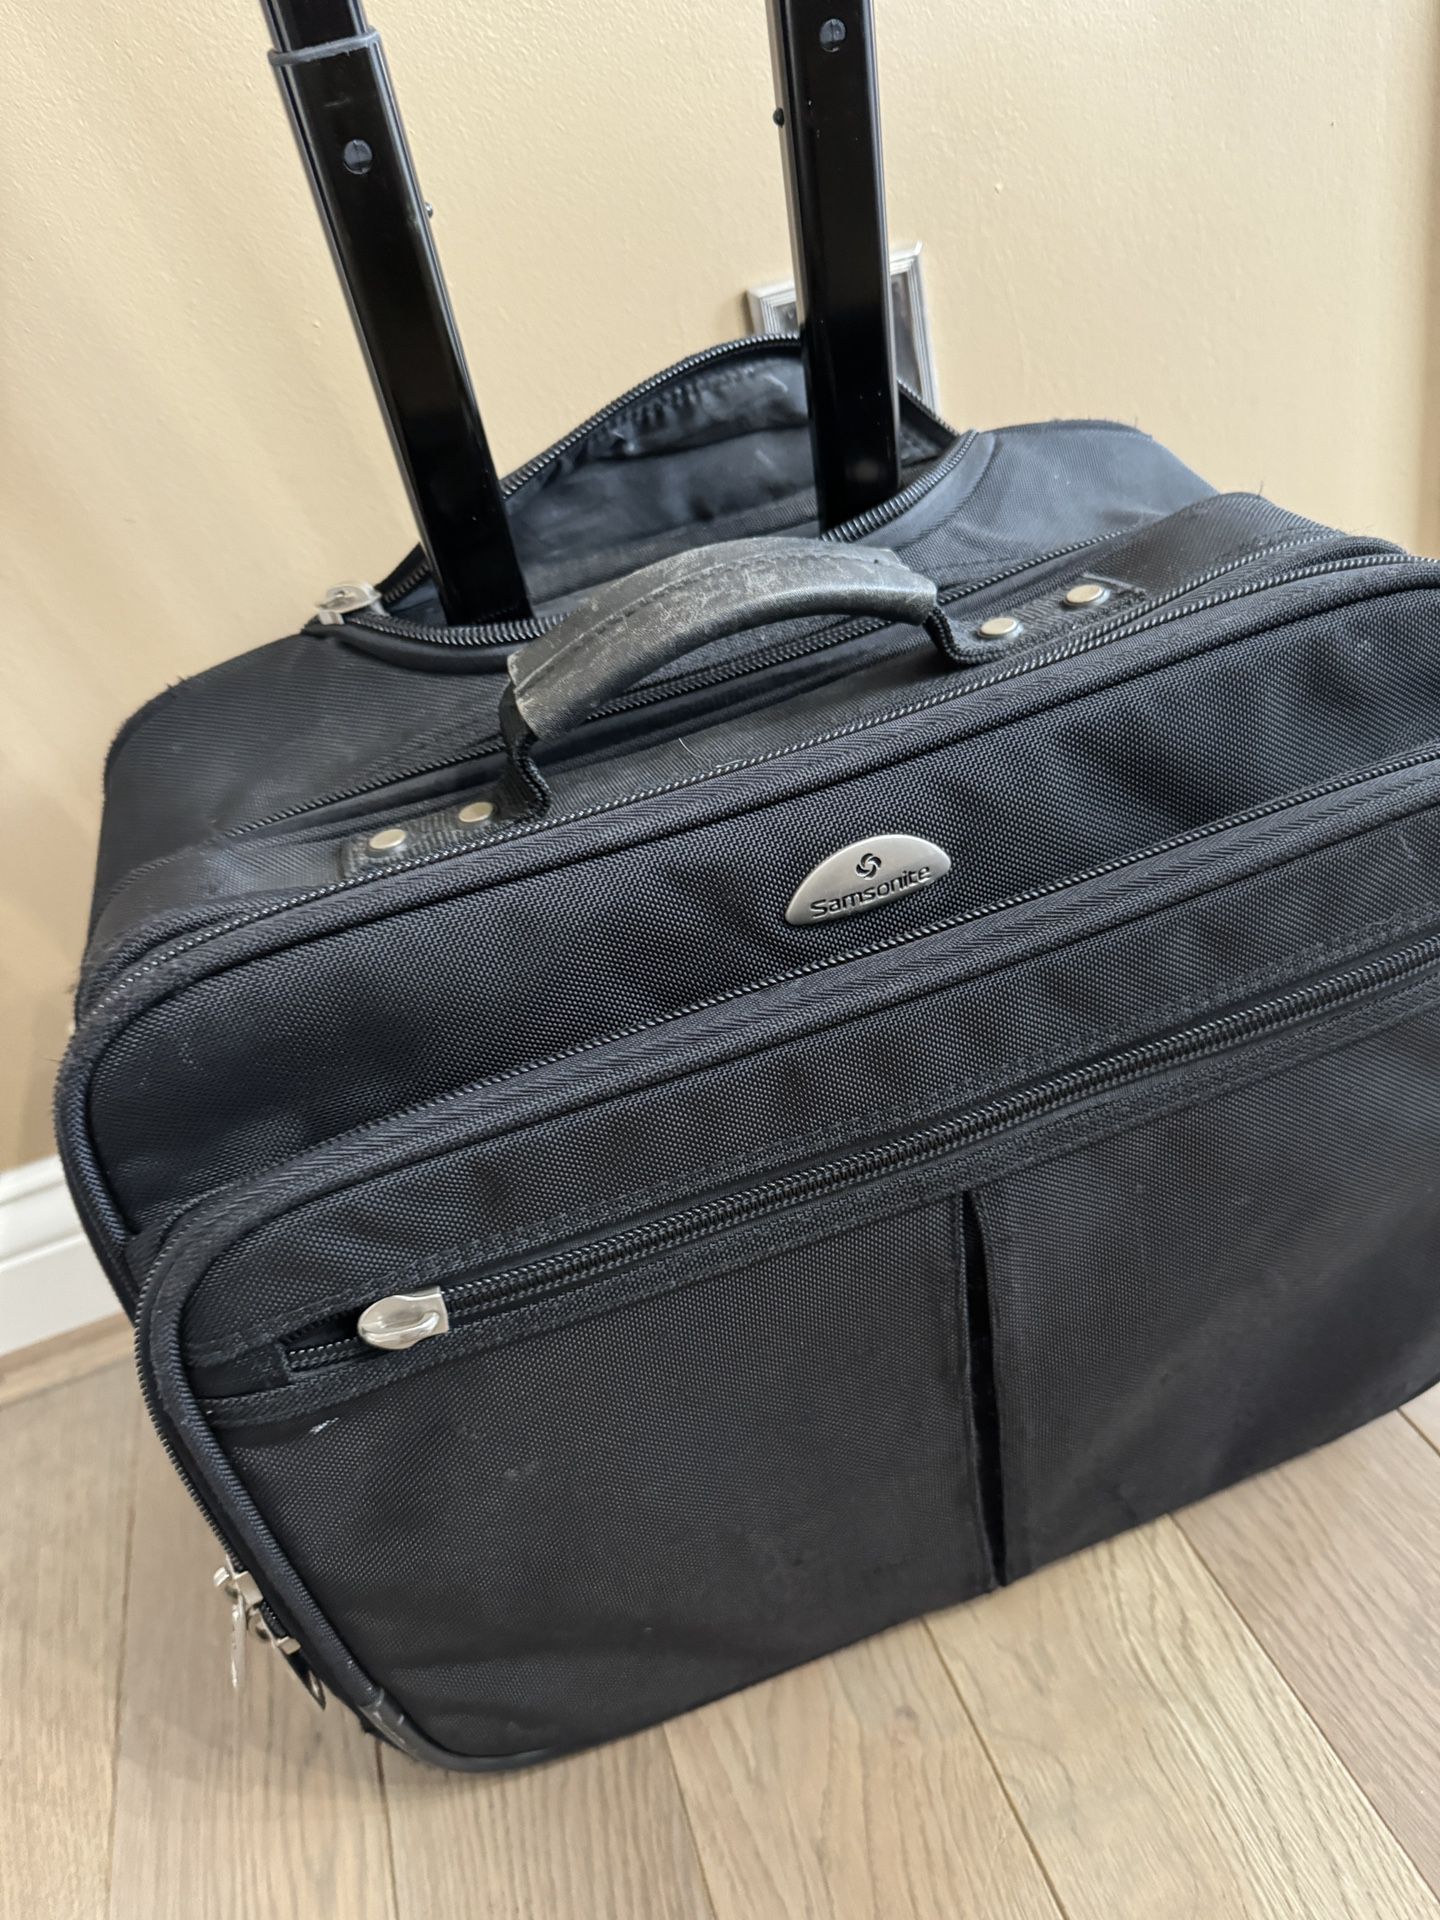 Samsonite Rolling Laptop Bag in good shape! Tons of storage and handle can also stow away in bag.